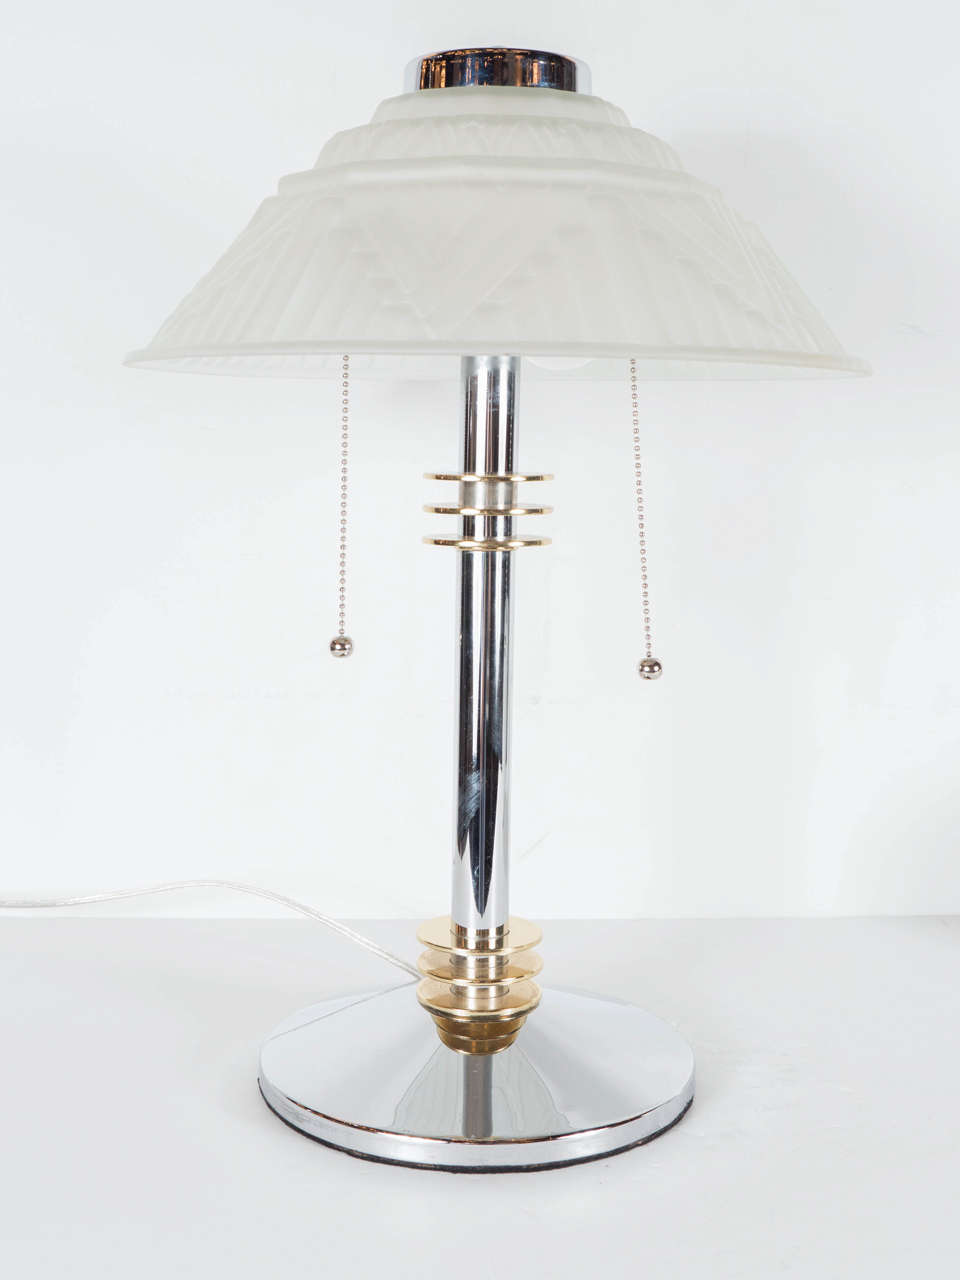 This stunning Art Deco skyscraper style table or desk lamp is beautiful and exceptional. It features relief frosted glass globe shade with a stylized Art Deco geometric design, a chromed base and neck, with circular accents of brass. It is in